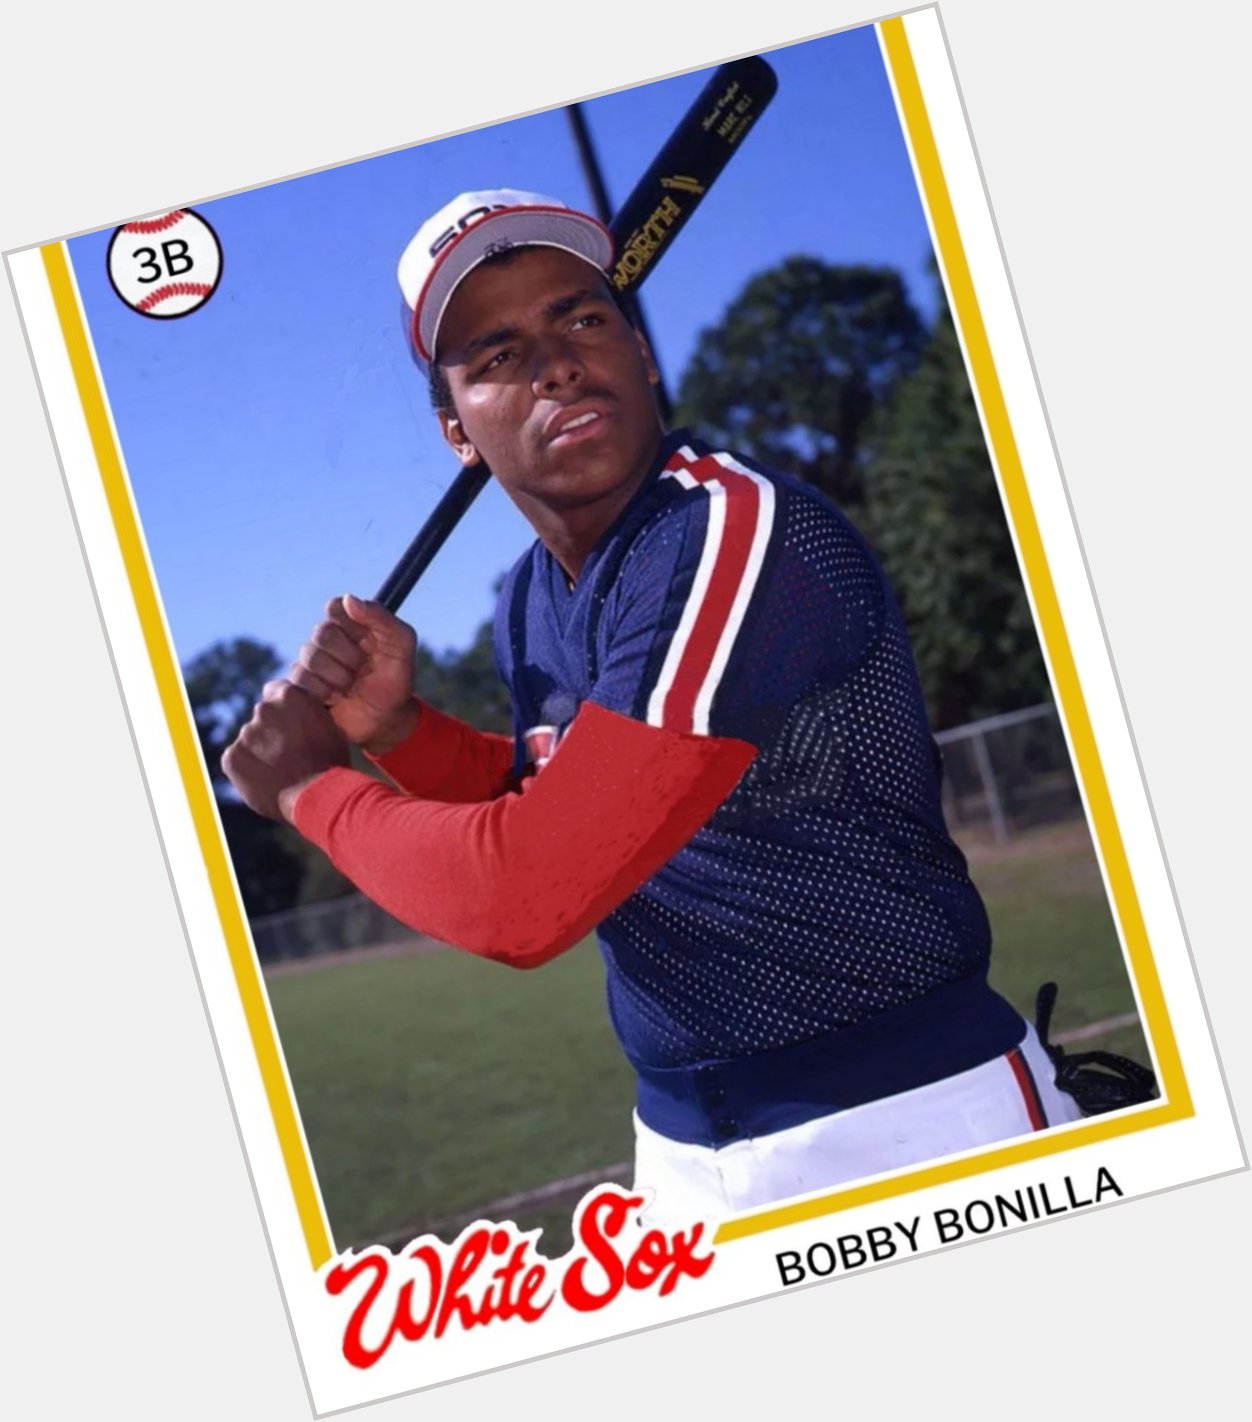 Happy Birthday to former and our favorite yearly recipient of $1M, Bobby Bonilla! 